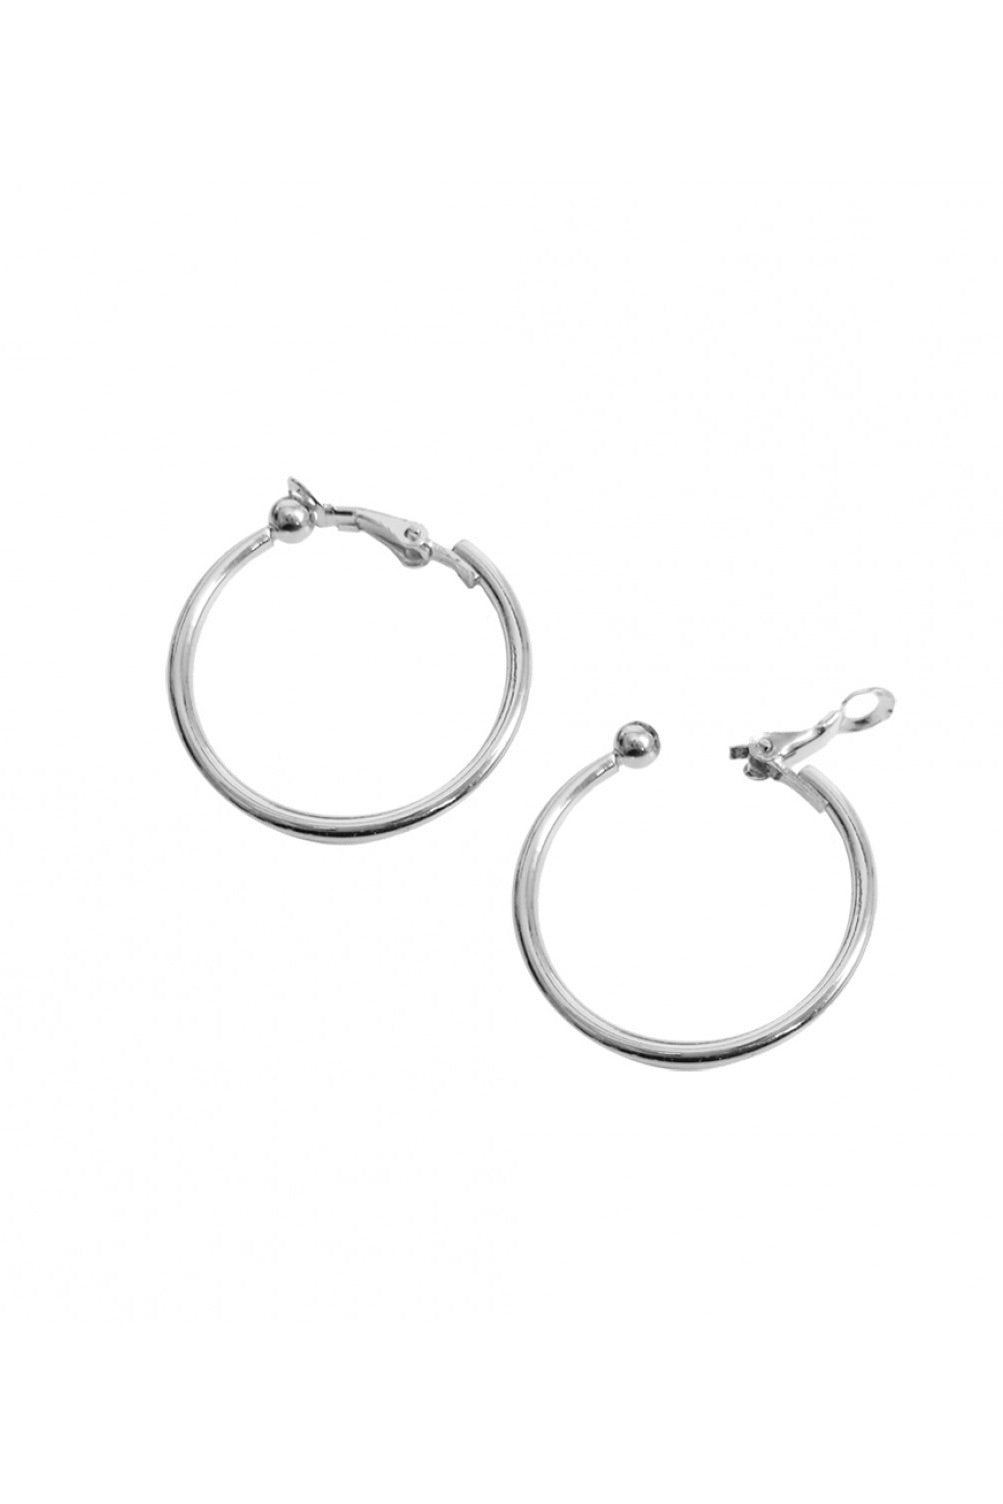 Simple Silver Clip Hoop Earrings Shiny Small Classic – Spot